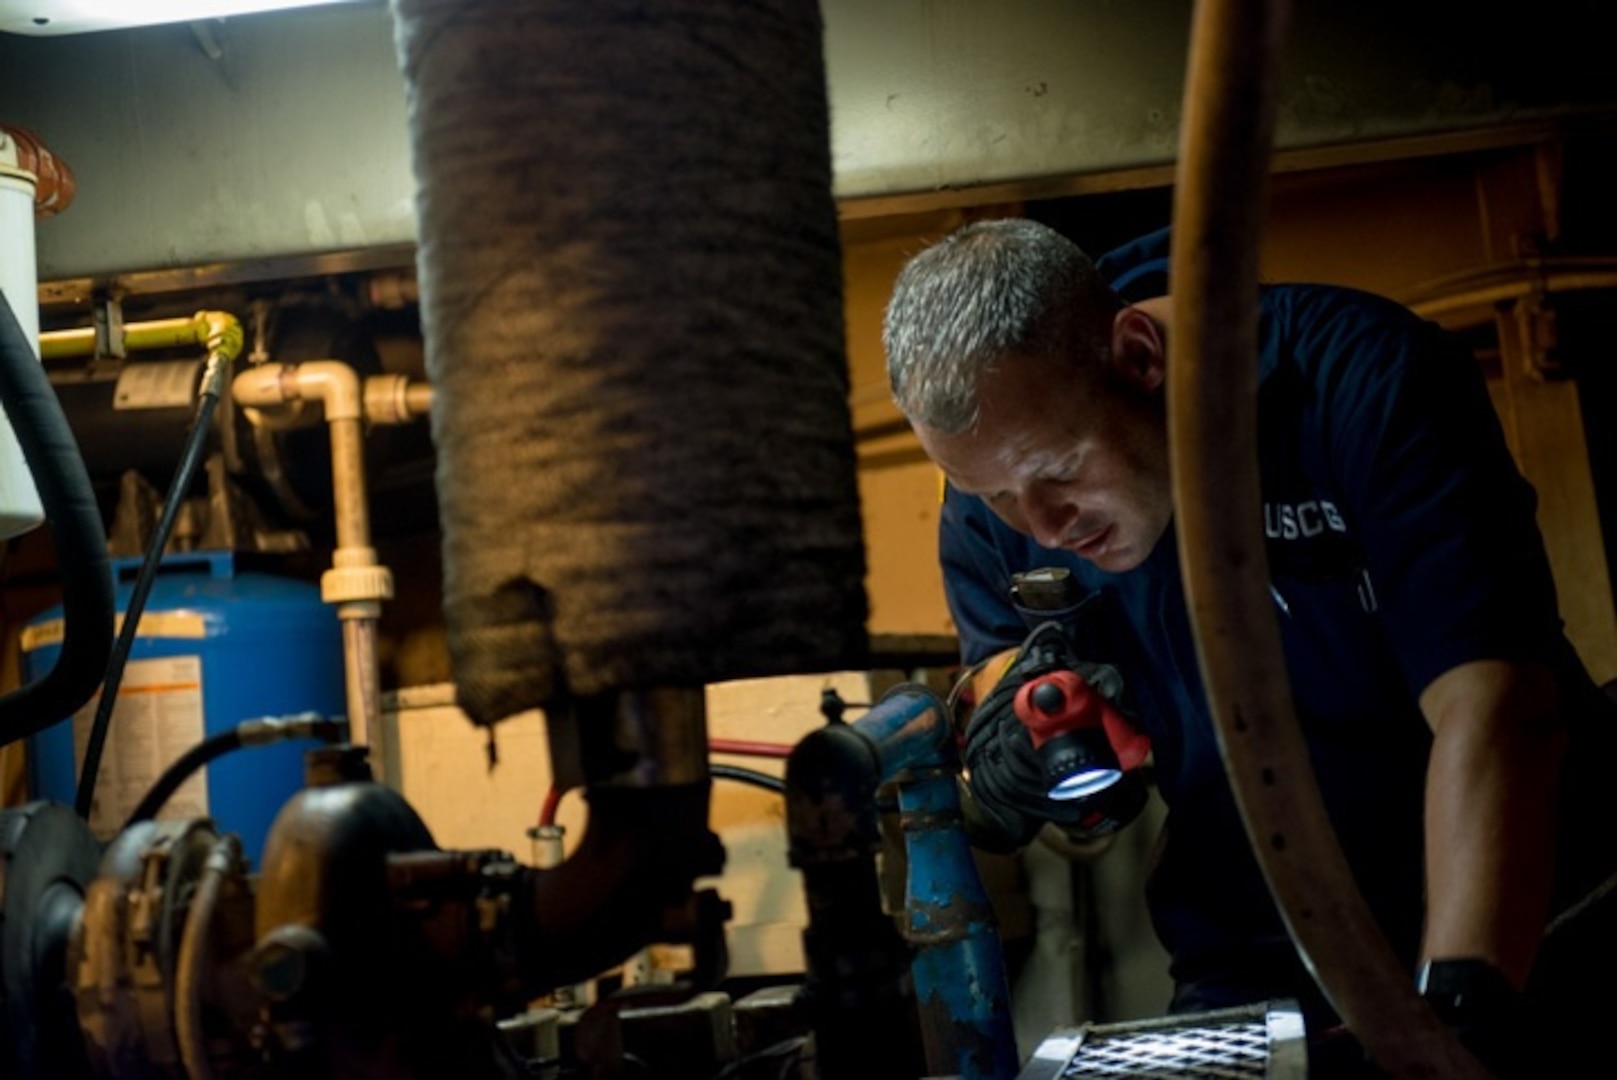 Chief Warrant Officer Aaron Studie examines a ship’s engine room as part of his domestic vessel inspection, July 14, 2015. The evolution of marine inspection has lead to regulations that protect the environment, provide a standard for the seaworthiness of the vessel and reliability of emergency equipment. (U.S. Coast Guard photo by Petty Officer 2nd Class David R. Marin)